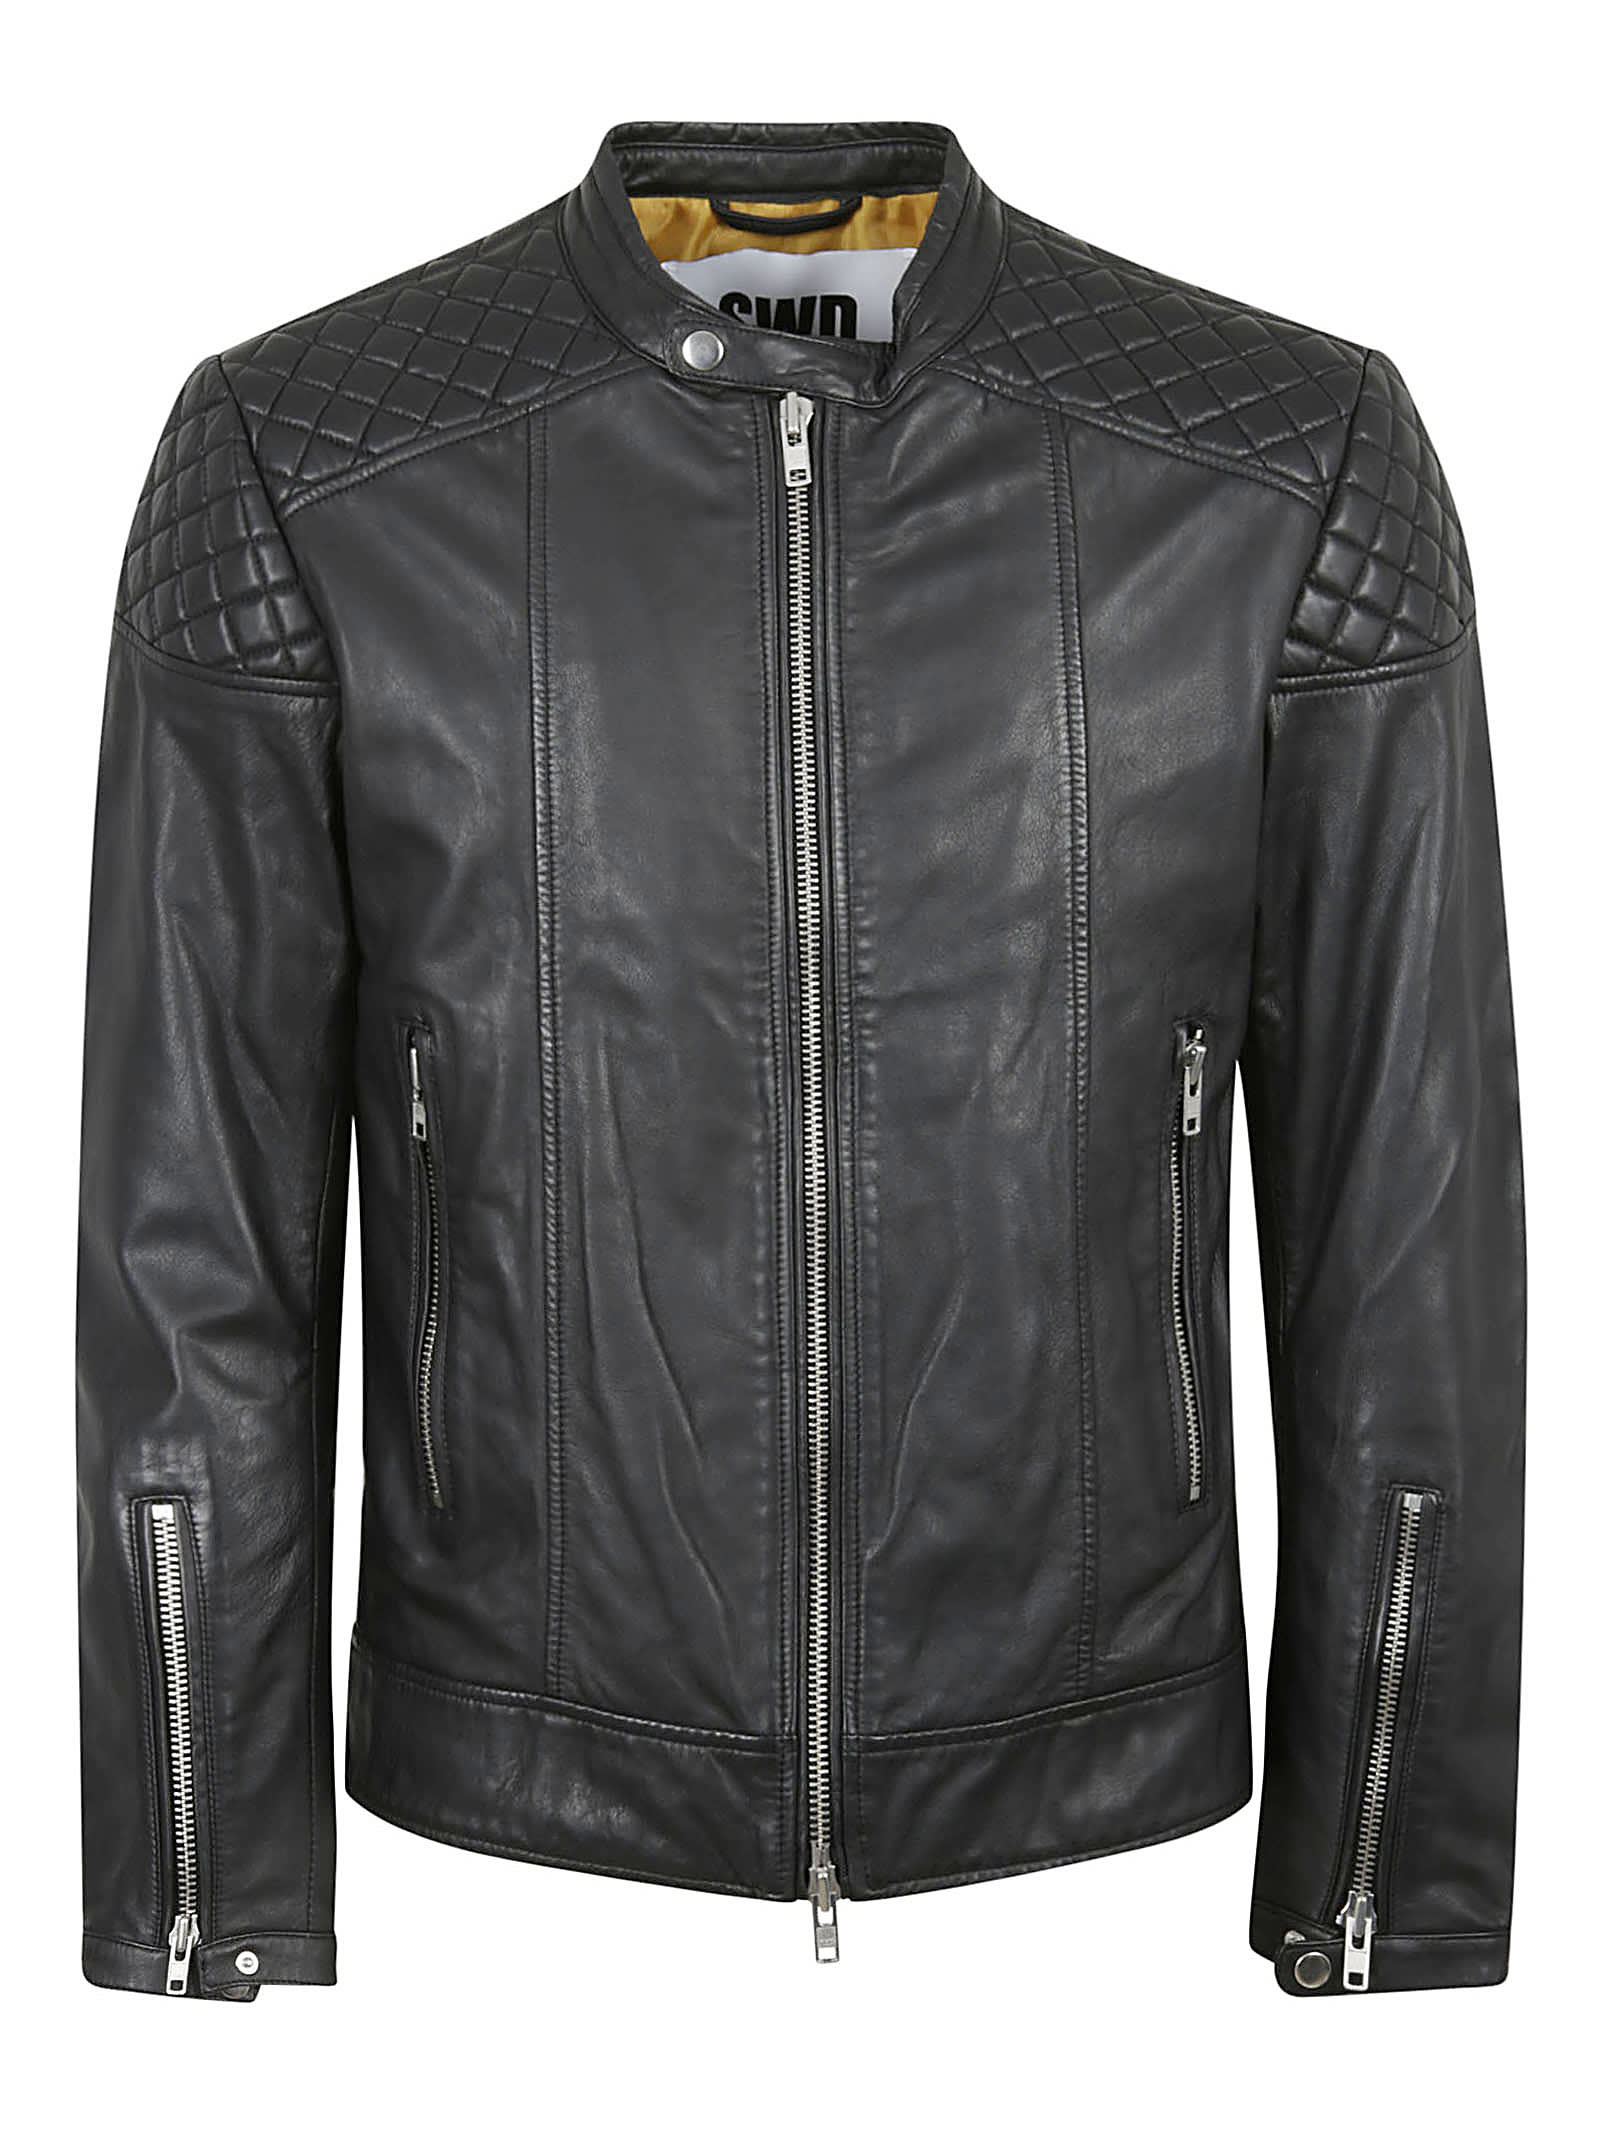 S.W.O.R.D 6.6.44 Quilt Paneled Leather Jacket